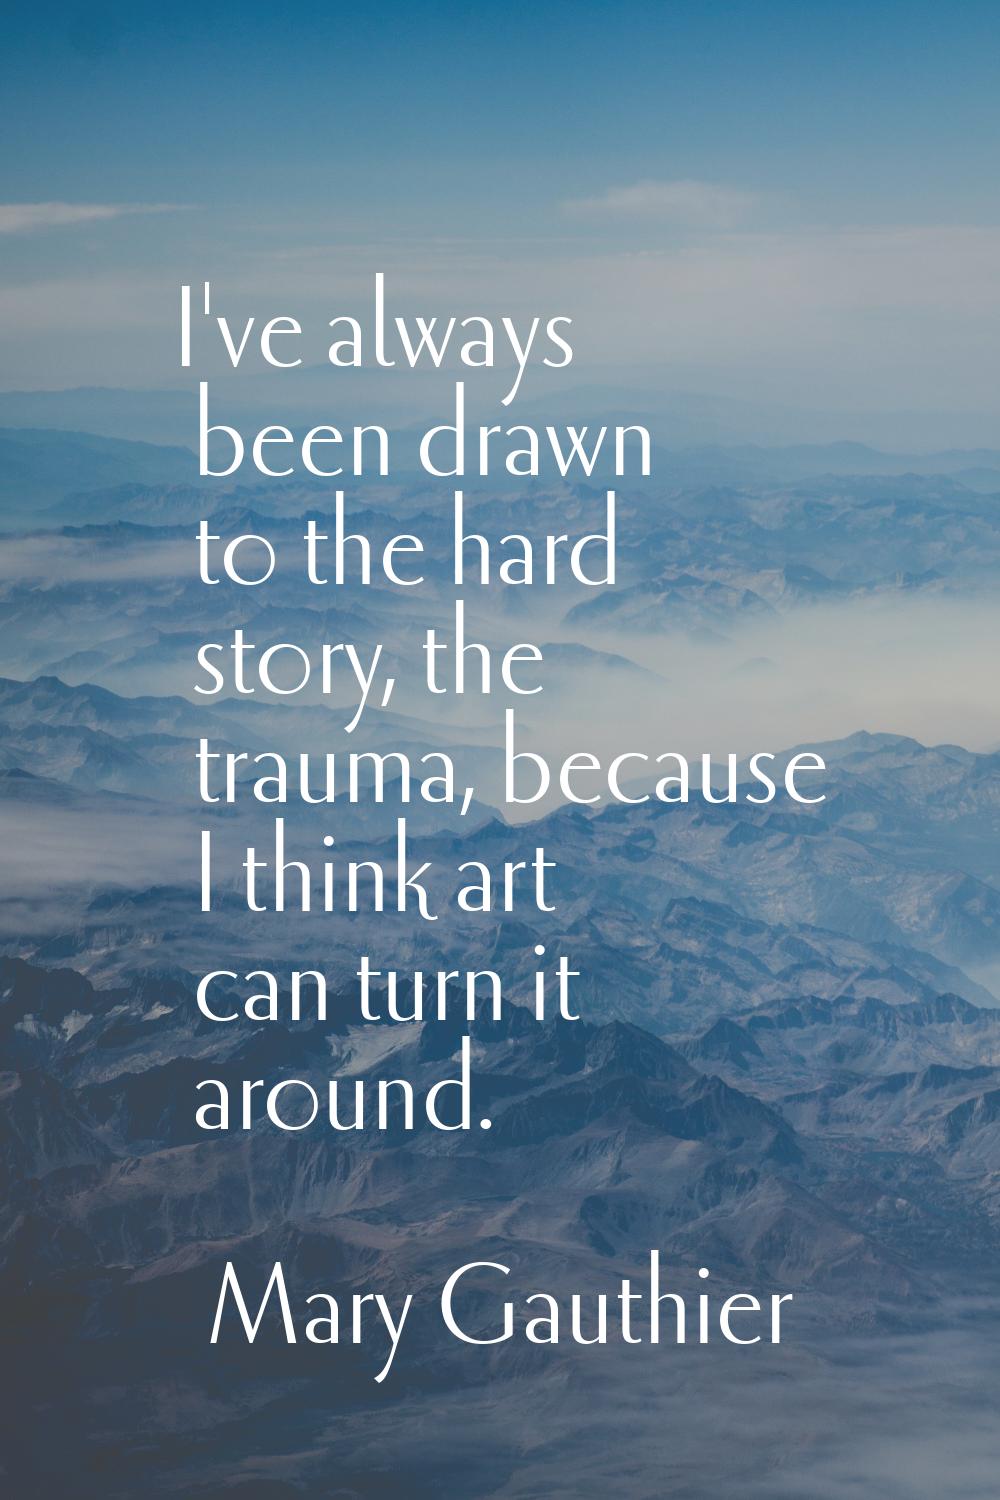 I've always been drawn to the hard story, the trauma, because I think art can turn it around.